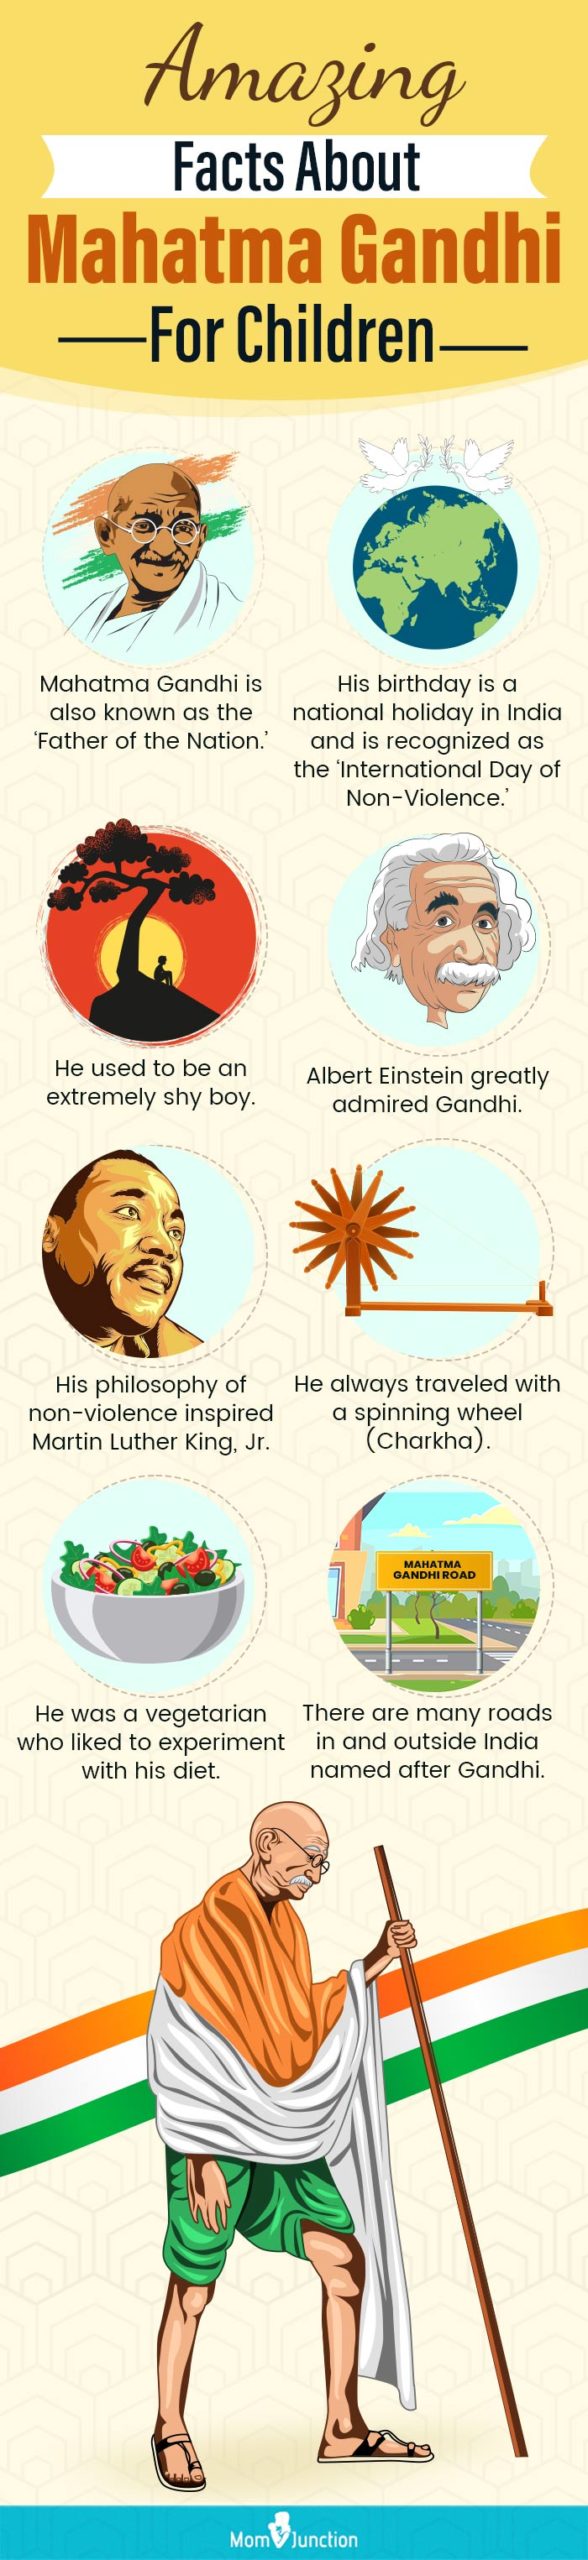 amazing facts about mahatma gandhi for children (infographic)